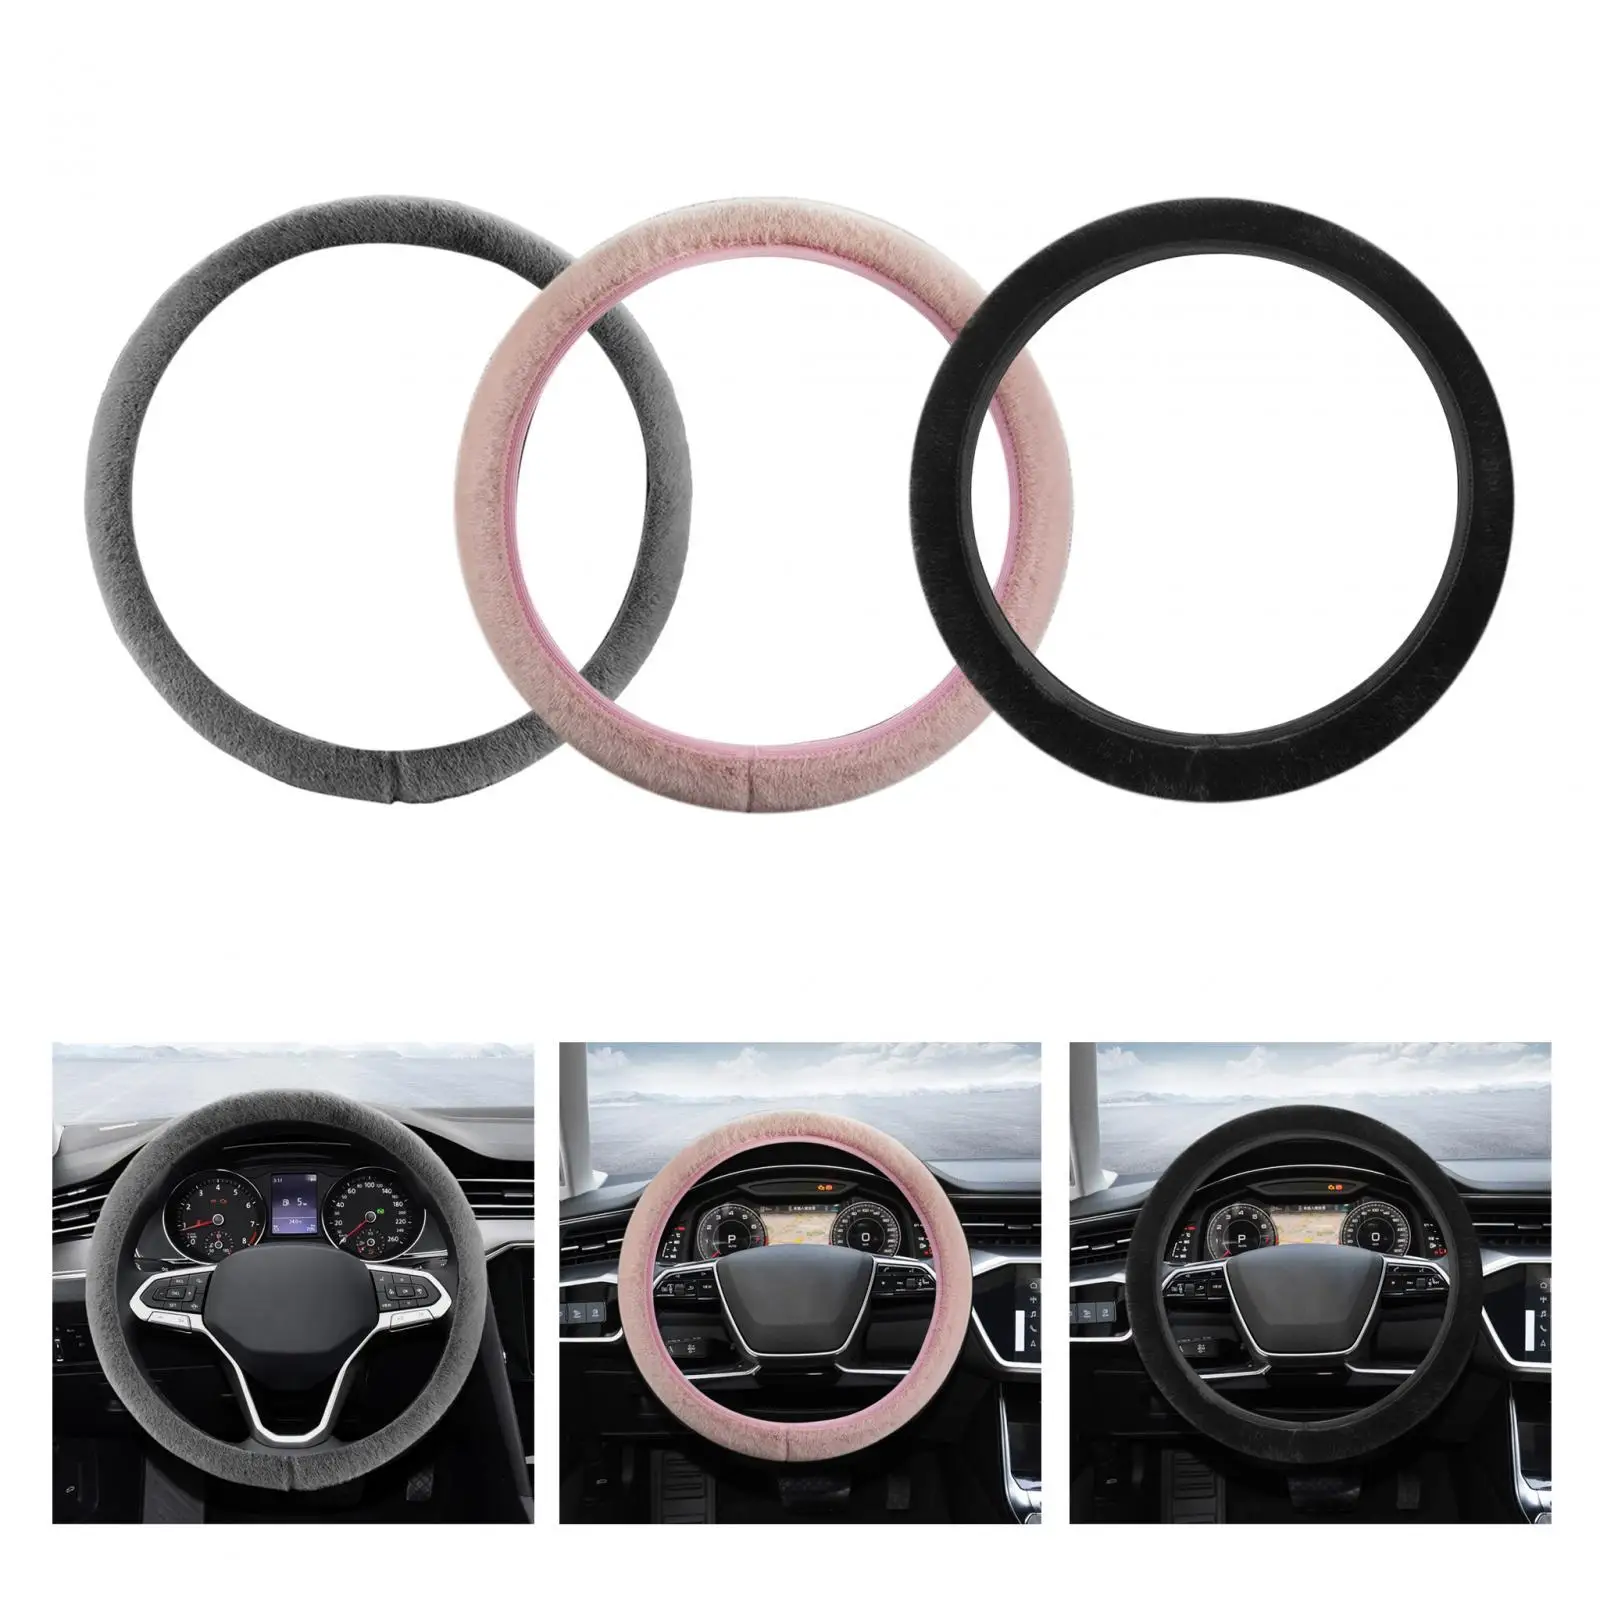 38cm Soft Plush Car Steering Wheel Cover Sturdy Stylish Lightweight Convenient Assemble Breathable Comfortable Grip Accessory